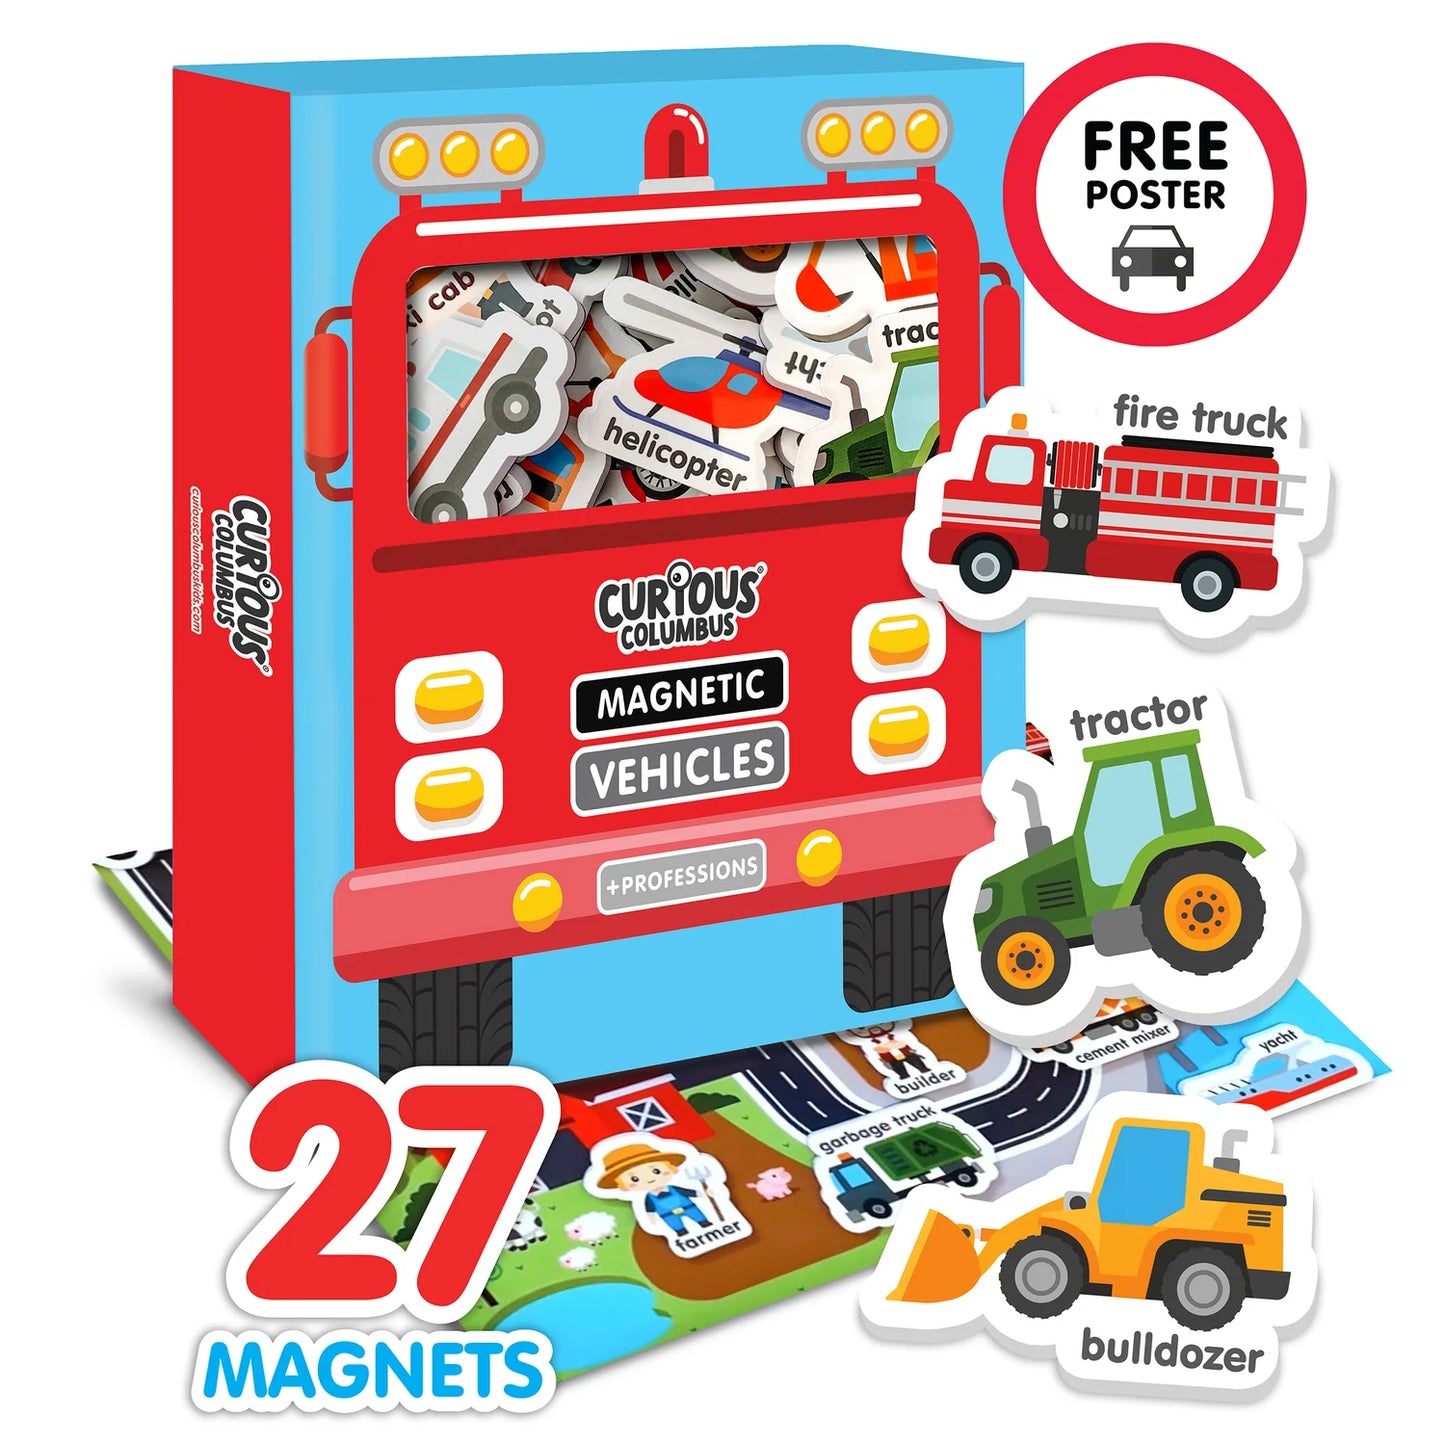 Magnetic Vehicles and Professional